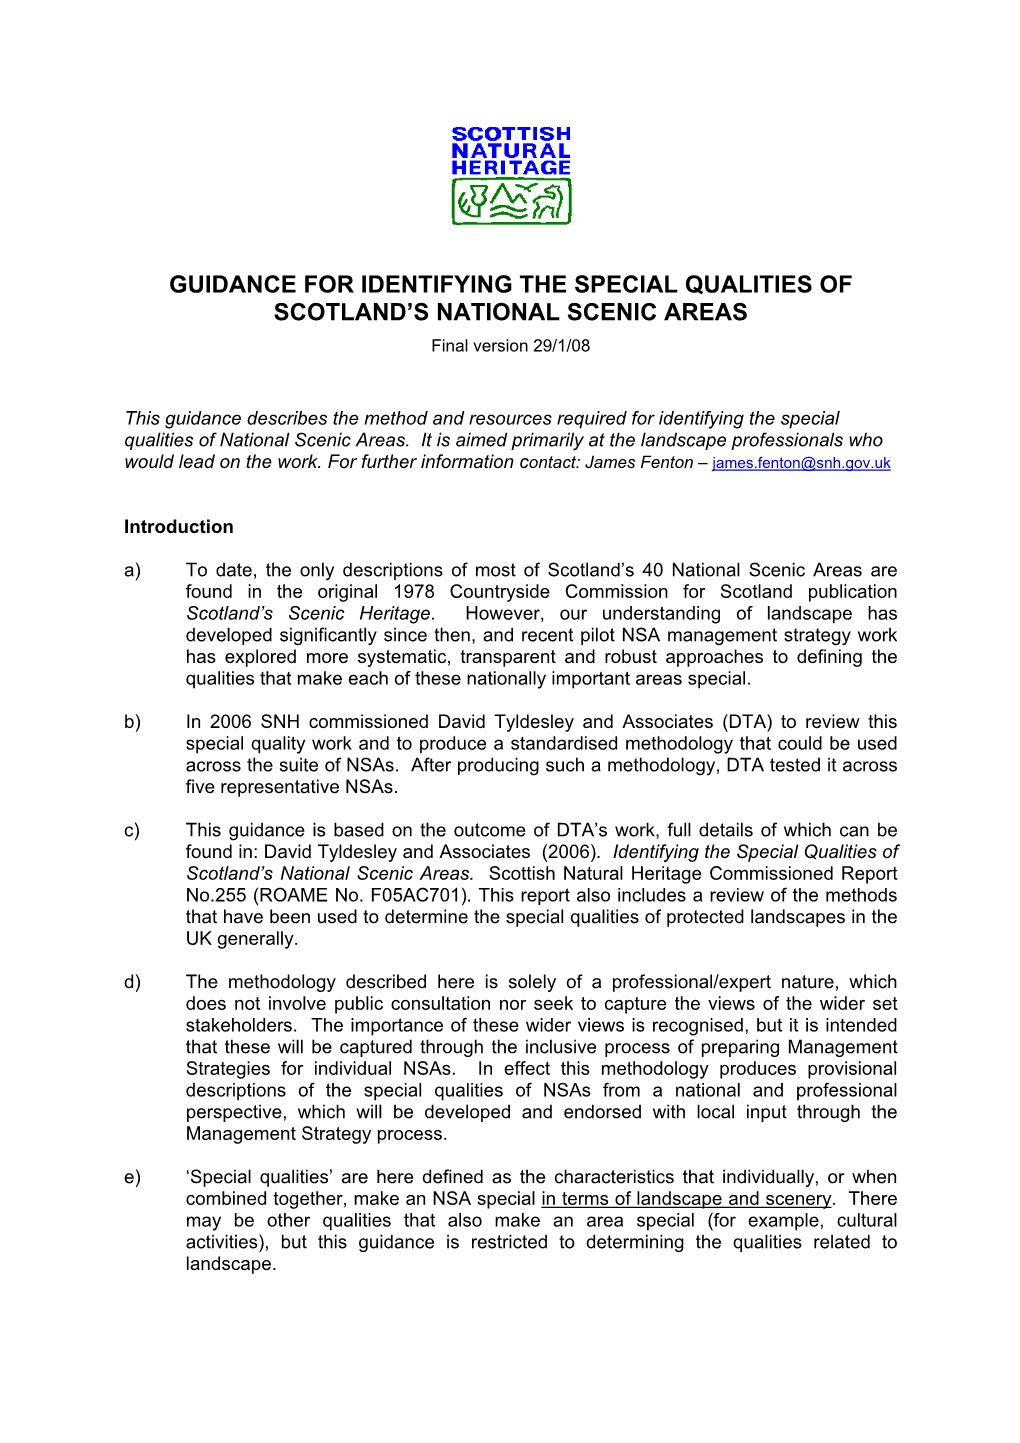 GUIDANCE for IDENTIFYING the SPECIAL QUALITIES of SCOTLAND’S NATIONAL SCENIC AREAS Final Version 29/1/08